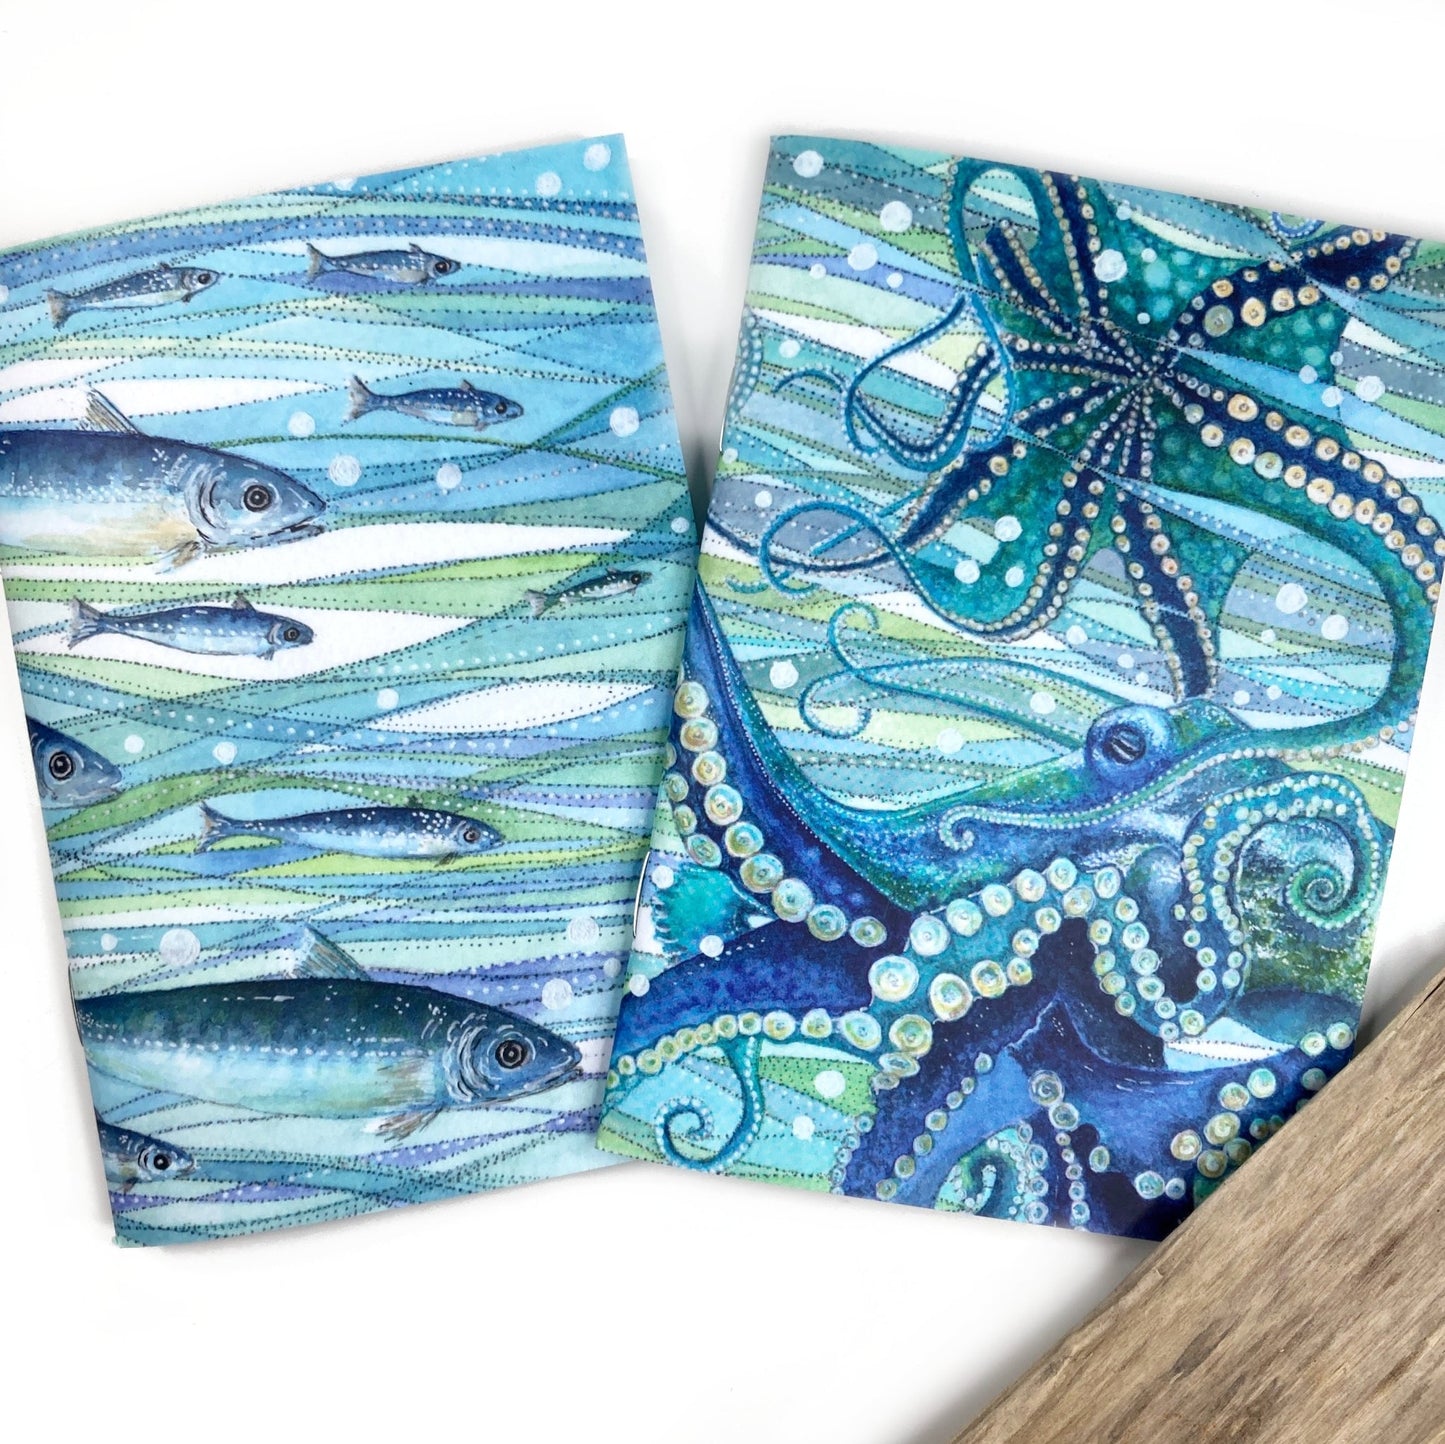 Small Fish Notebook - A6 Pocket Notepad with Lined Paper - Seaside Stationery - East Neuk Beach Crafts